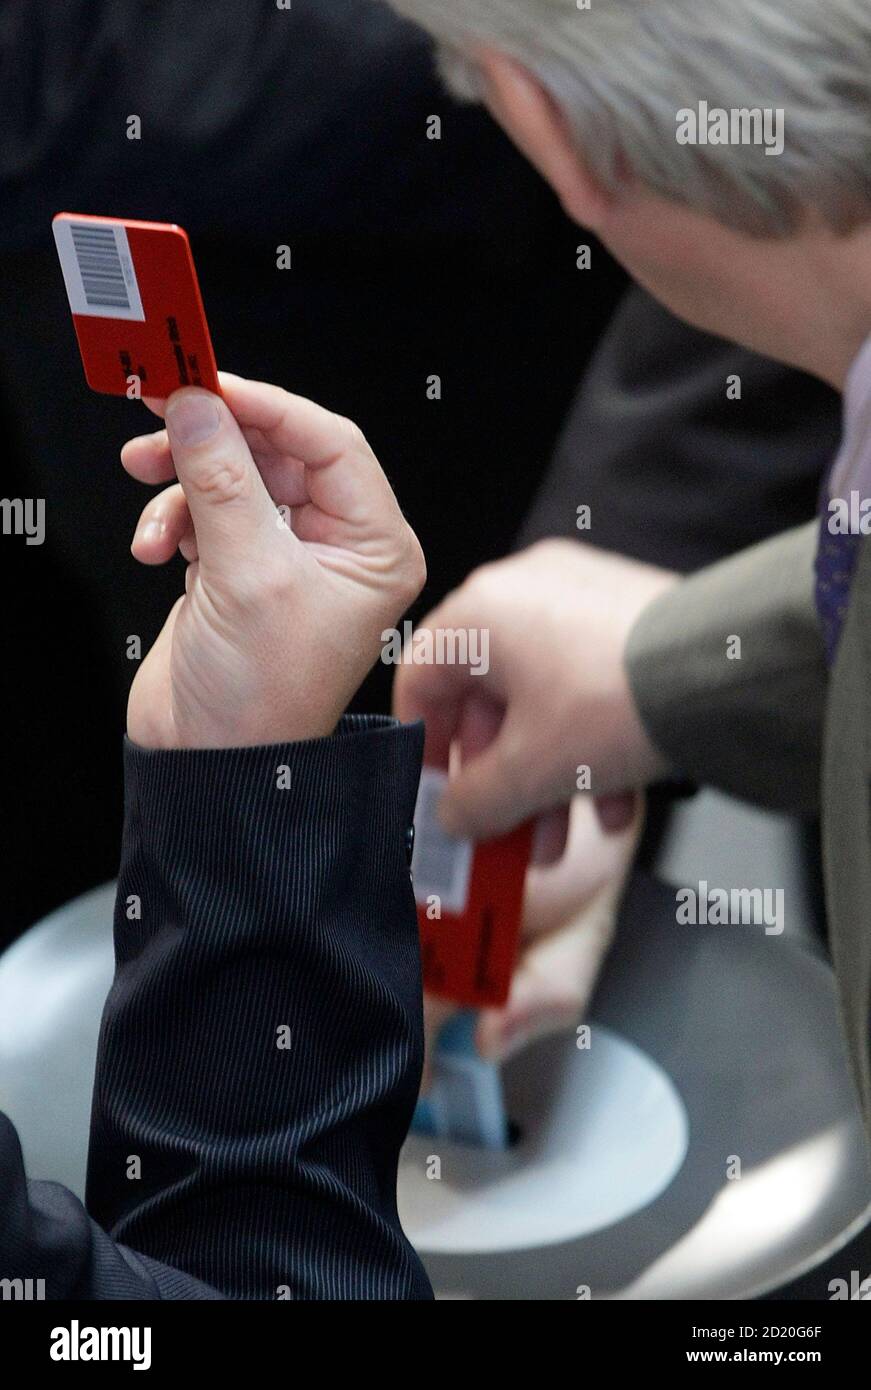 Representatives cast their votes during a session of the house of parliament 'Bundestag' in Berlin November 15, 2007. The parliamentarians voted on the further deployment of German troops in the American-led war on terror operation 'Enduring Freedom' (OEF). REUTERS/Hannibal Hanschke (GERMANY) Stock Photo